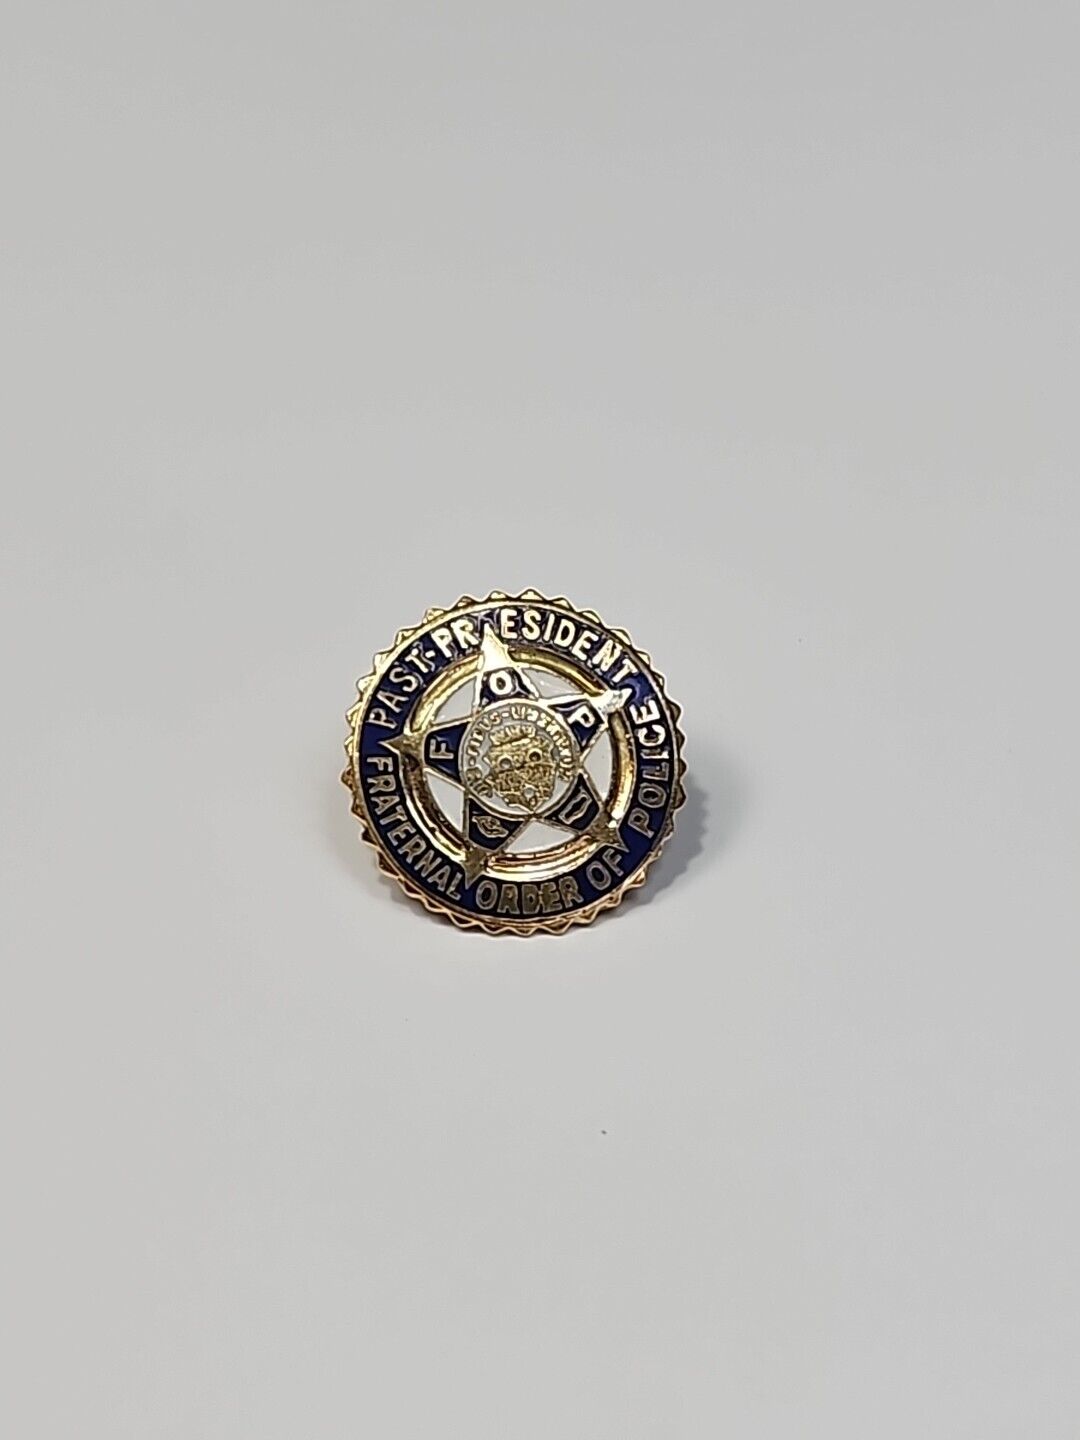 FOP Past President Lapel Pin Fraternal Order of Police 10K Yellow Gold Martin